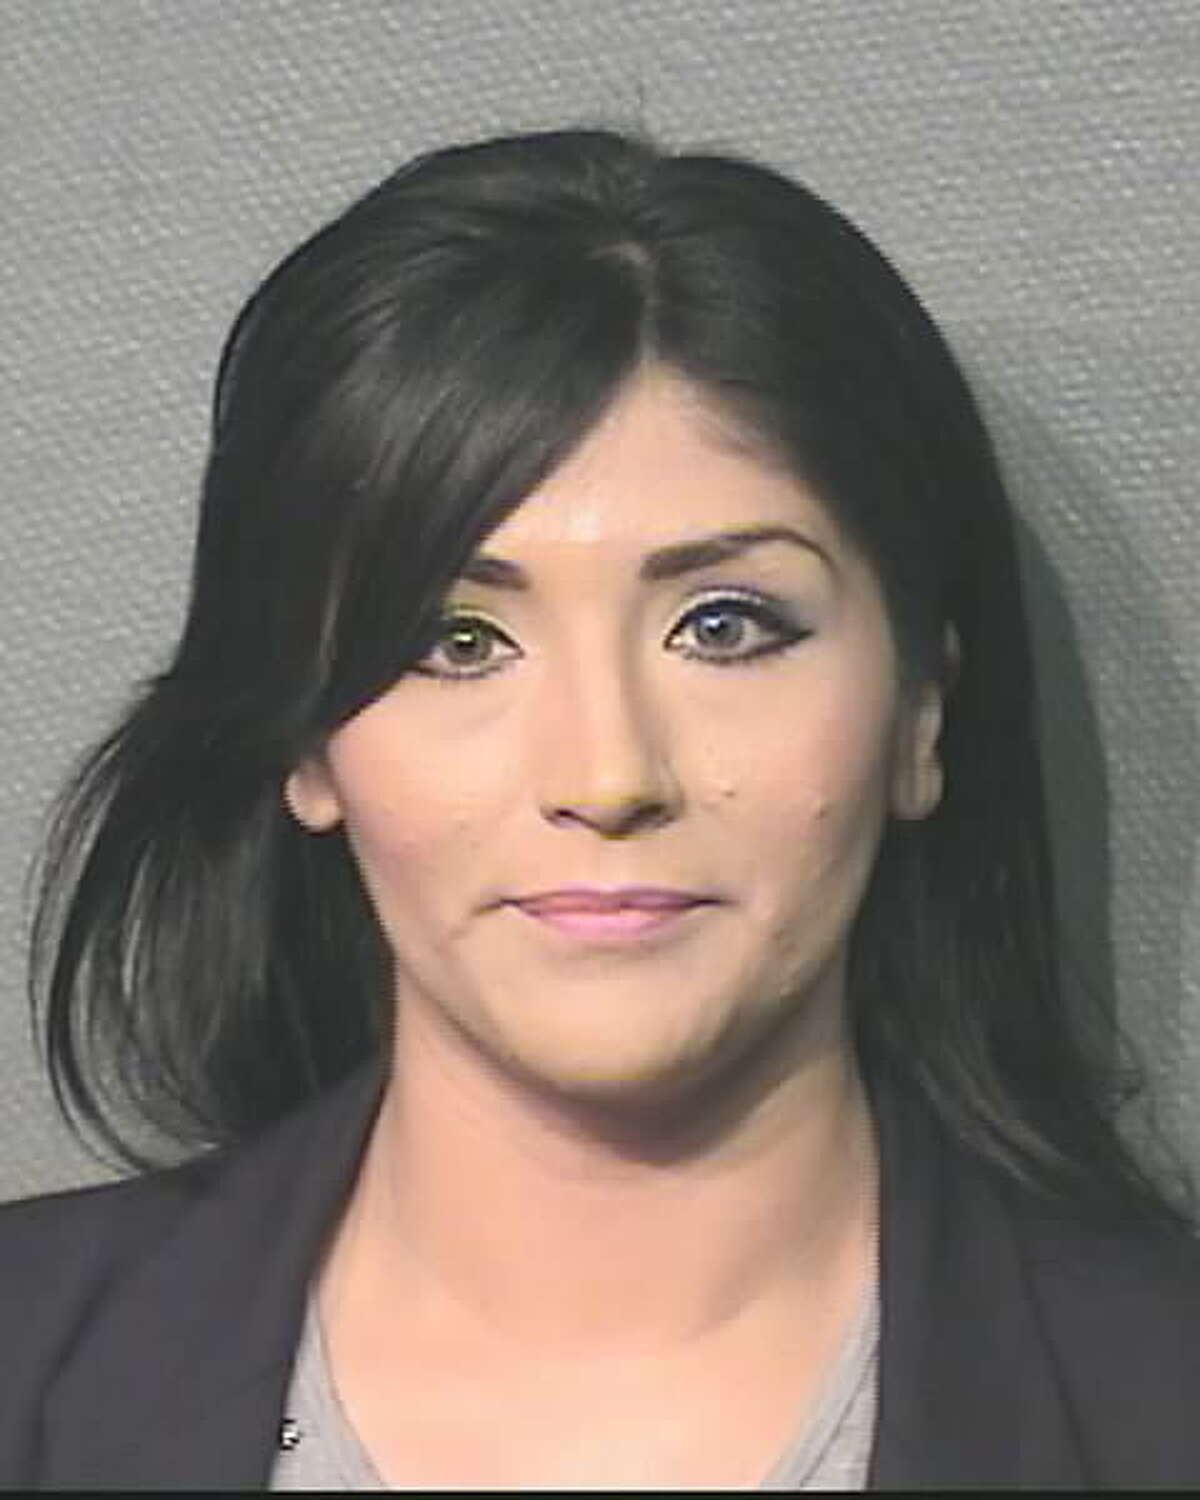 Houston police have arrested four people, including Brenda Reyes Awawde (pictured), accused of a long-running scam